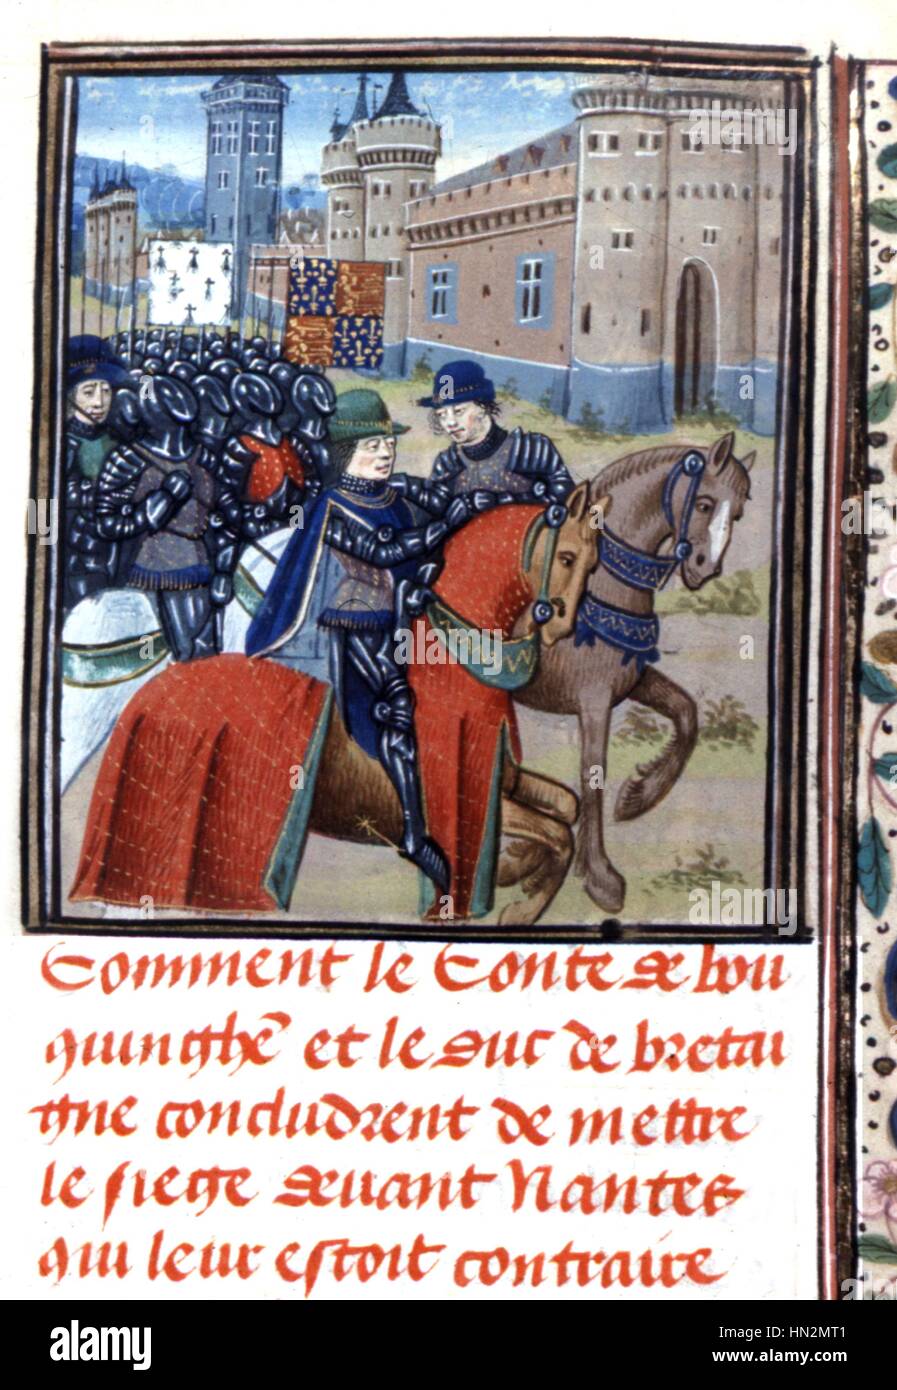 Chronicles of Jean Froissart (c.1337-c.1400) - Hundred Years' War. Jean de Montfort at the siege of Nantes 14th century France London. British museum Stock Photo